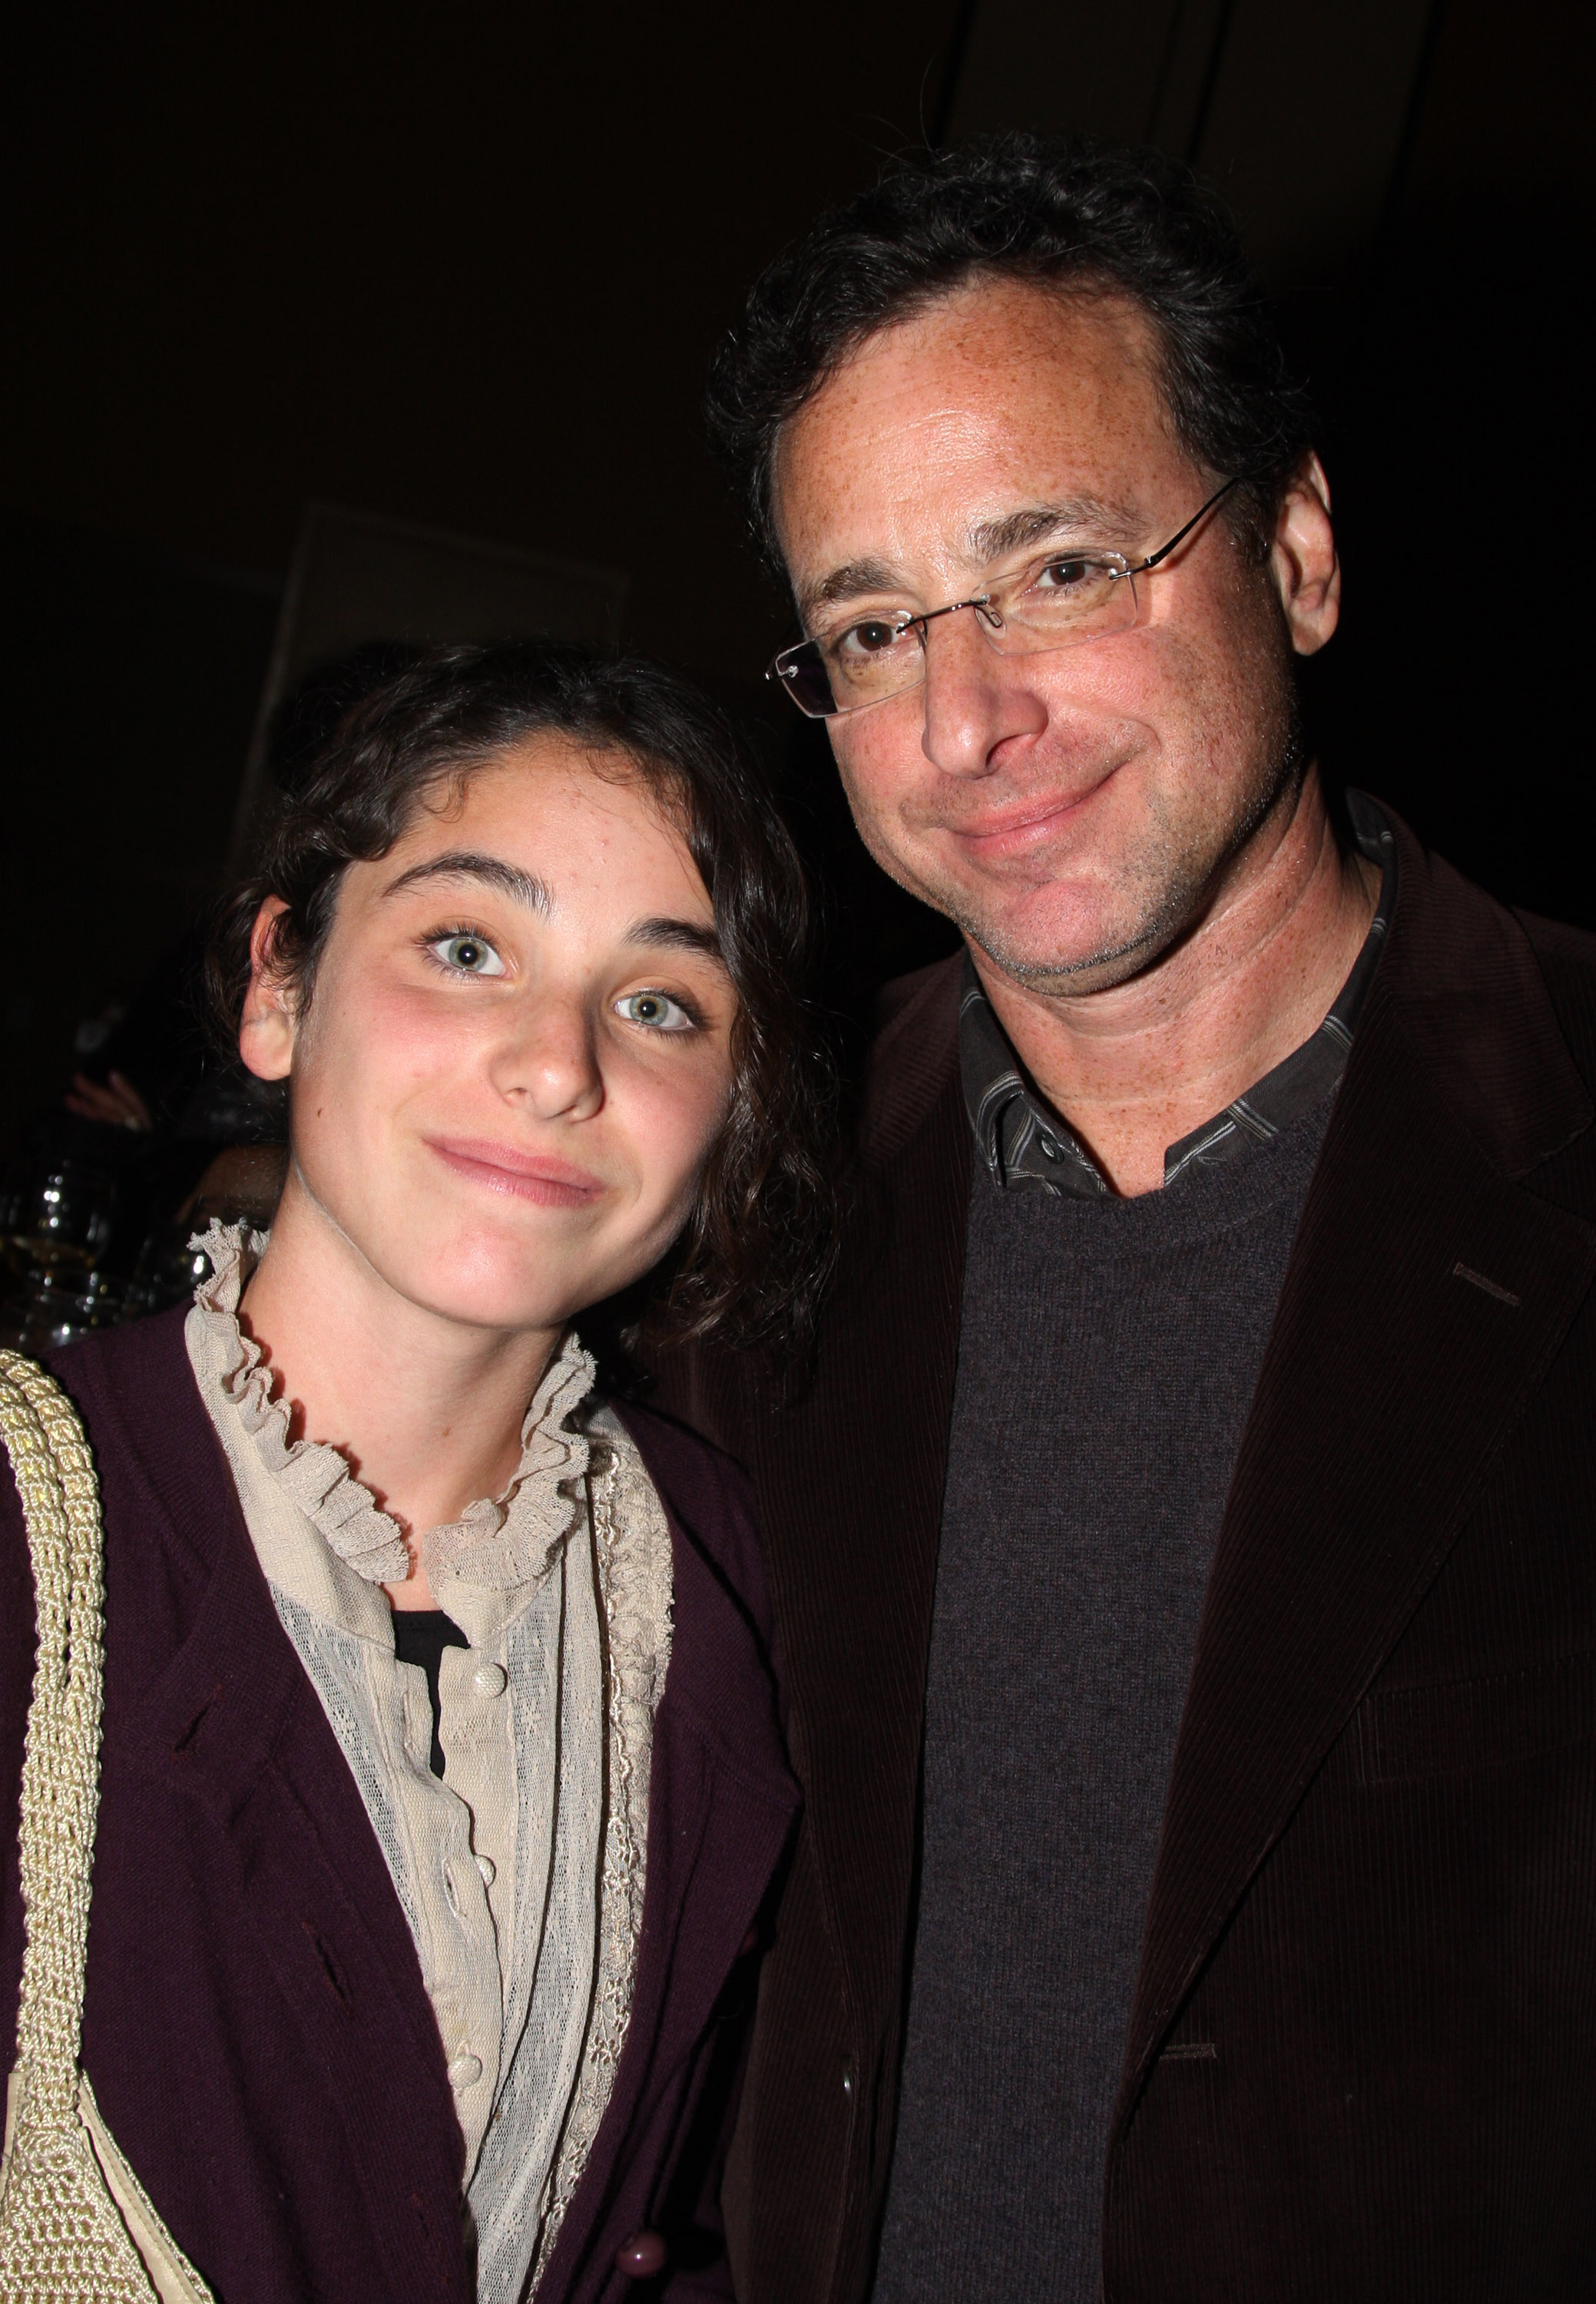 Bob Saget and Jennie Saget pose during the opening night party for the world premiere of "Minsky's" held at Ahmanson Theatre in Los Angeles, California on February 6, 2009. | Source: Getty Images